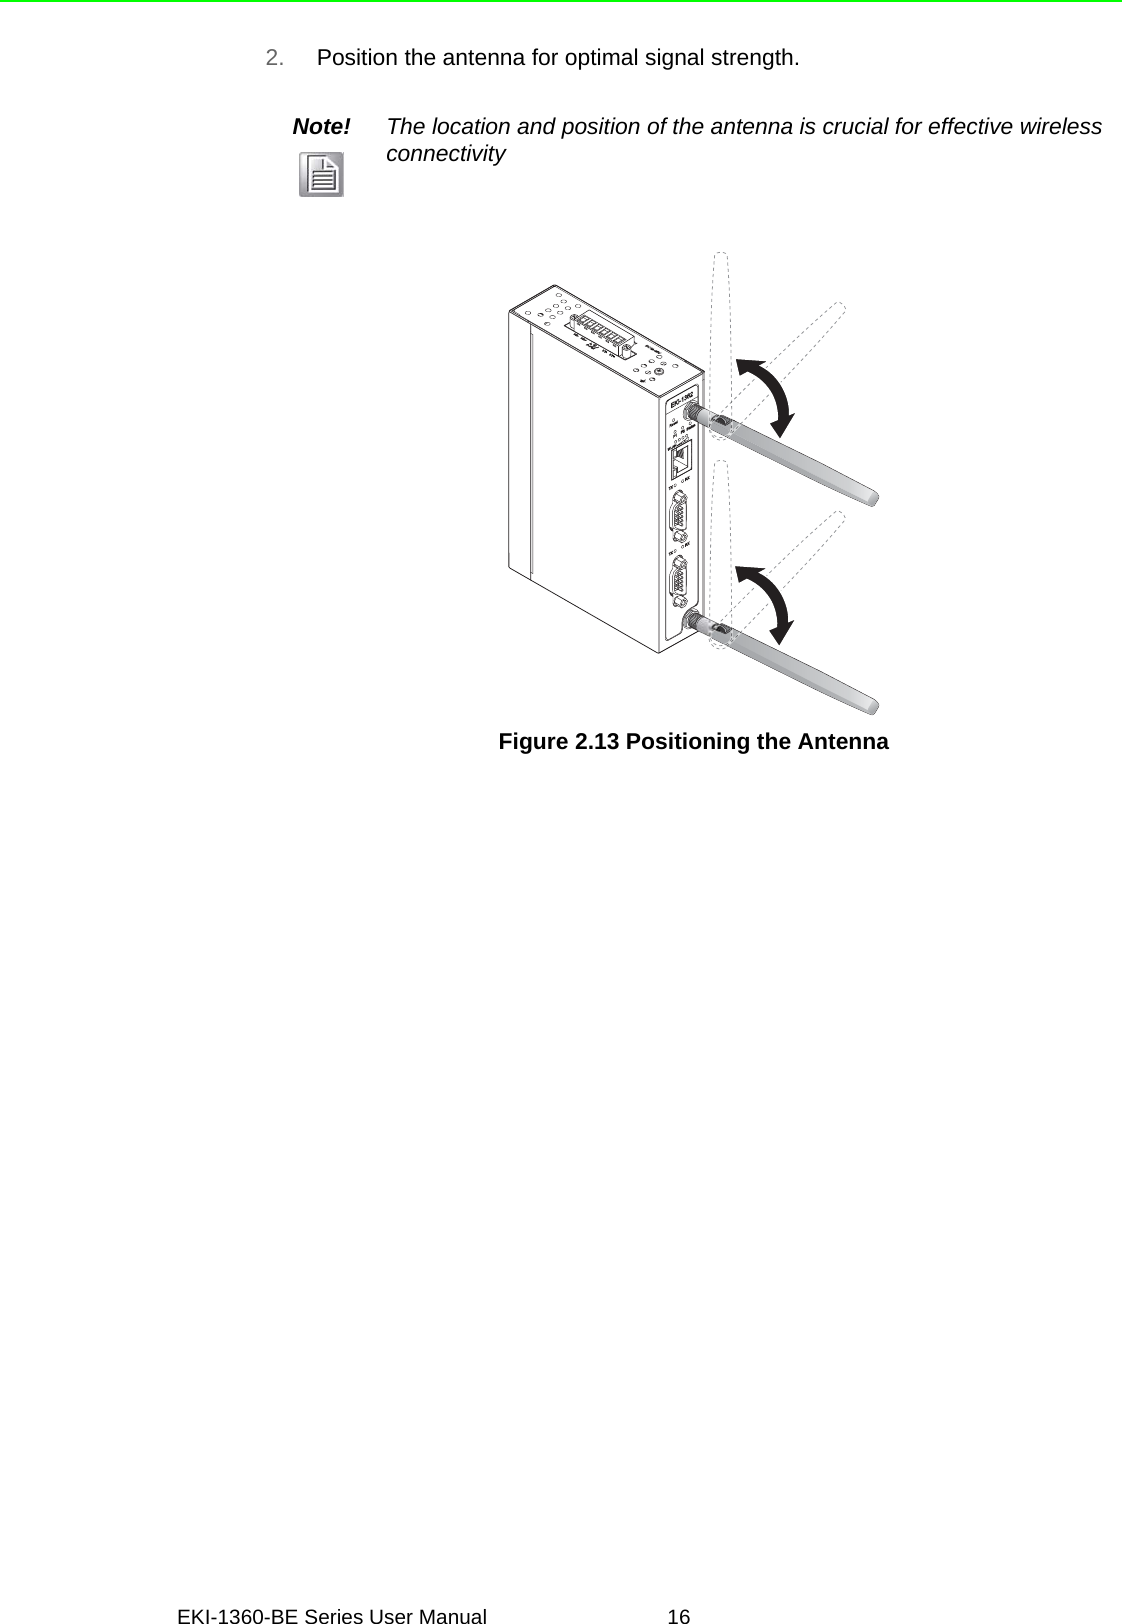 EKI-1360-BE Series User Manual 162. Position the antenna for optimal signal strength.Figure 2.13 Positioning the AntennaNote! The location and position of the antenna is crucial for effective wireless connectivityResetWLAN